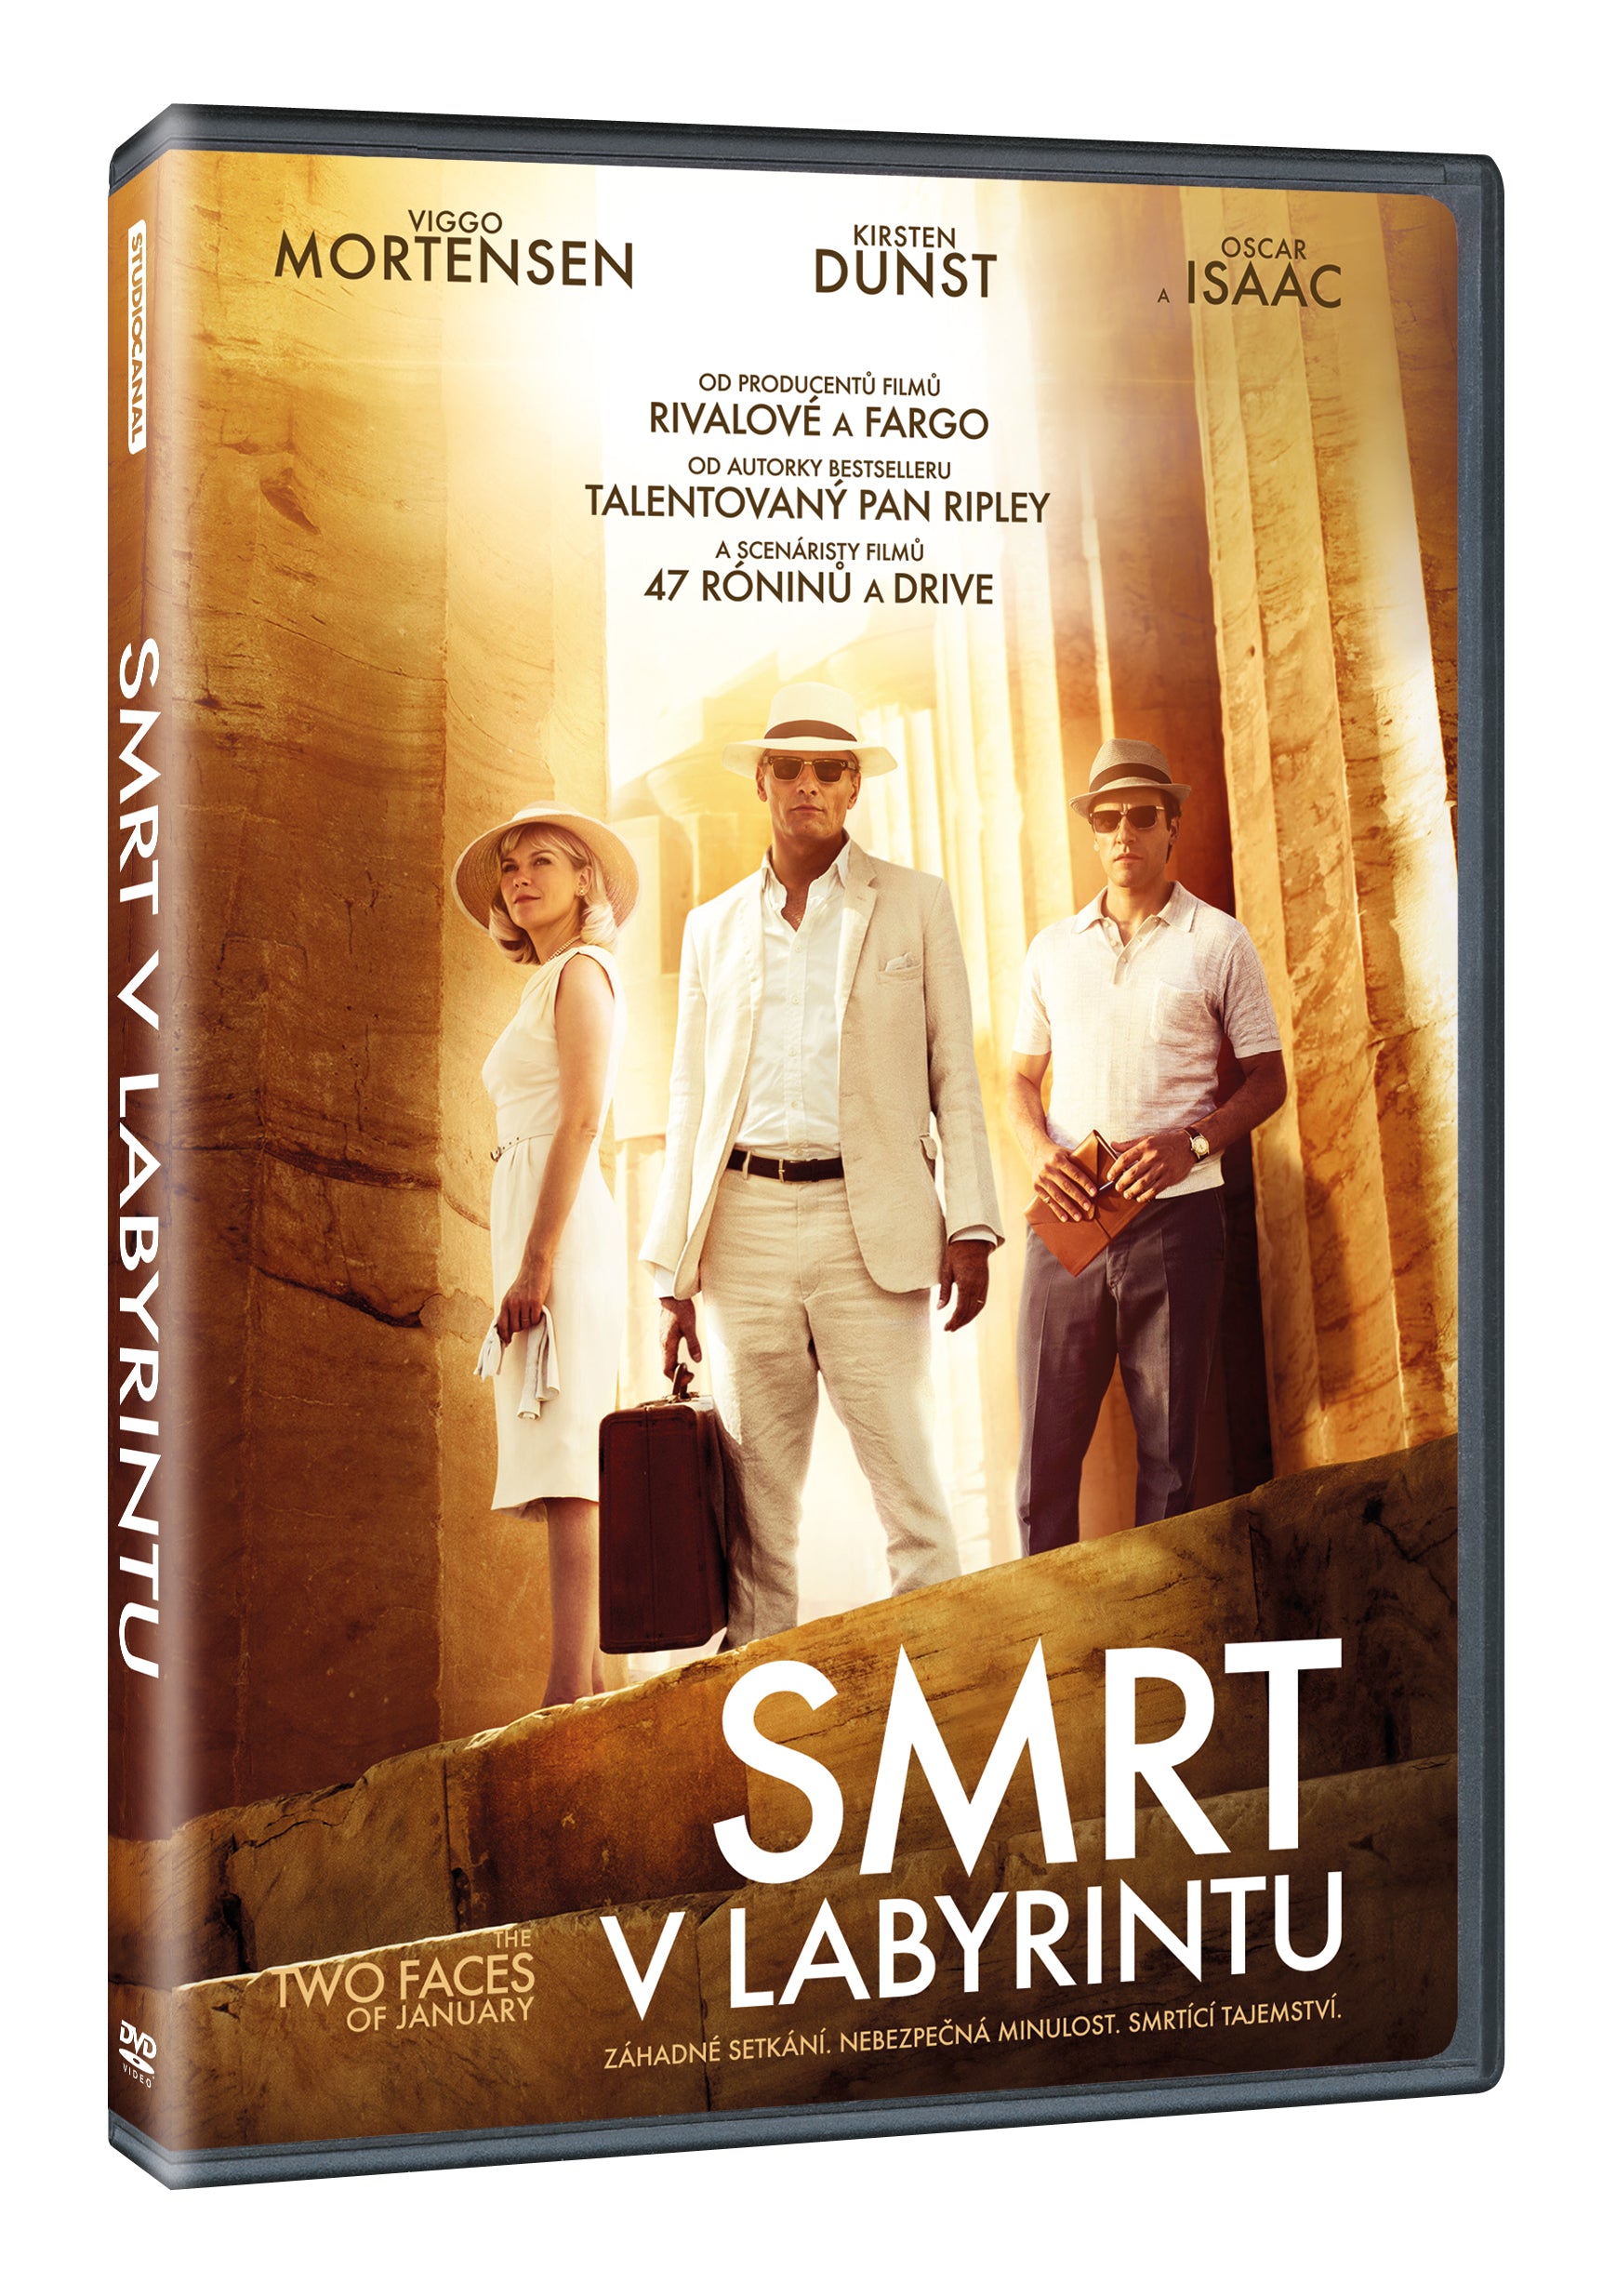 Smrt v labyrintu DVD / Two Faces of January